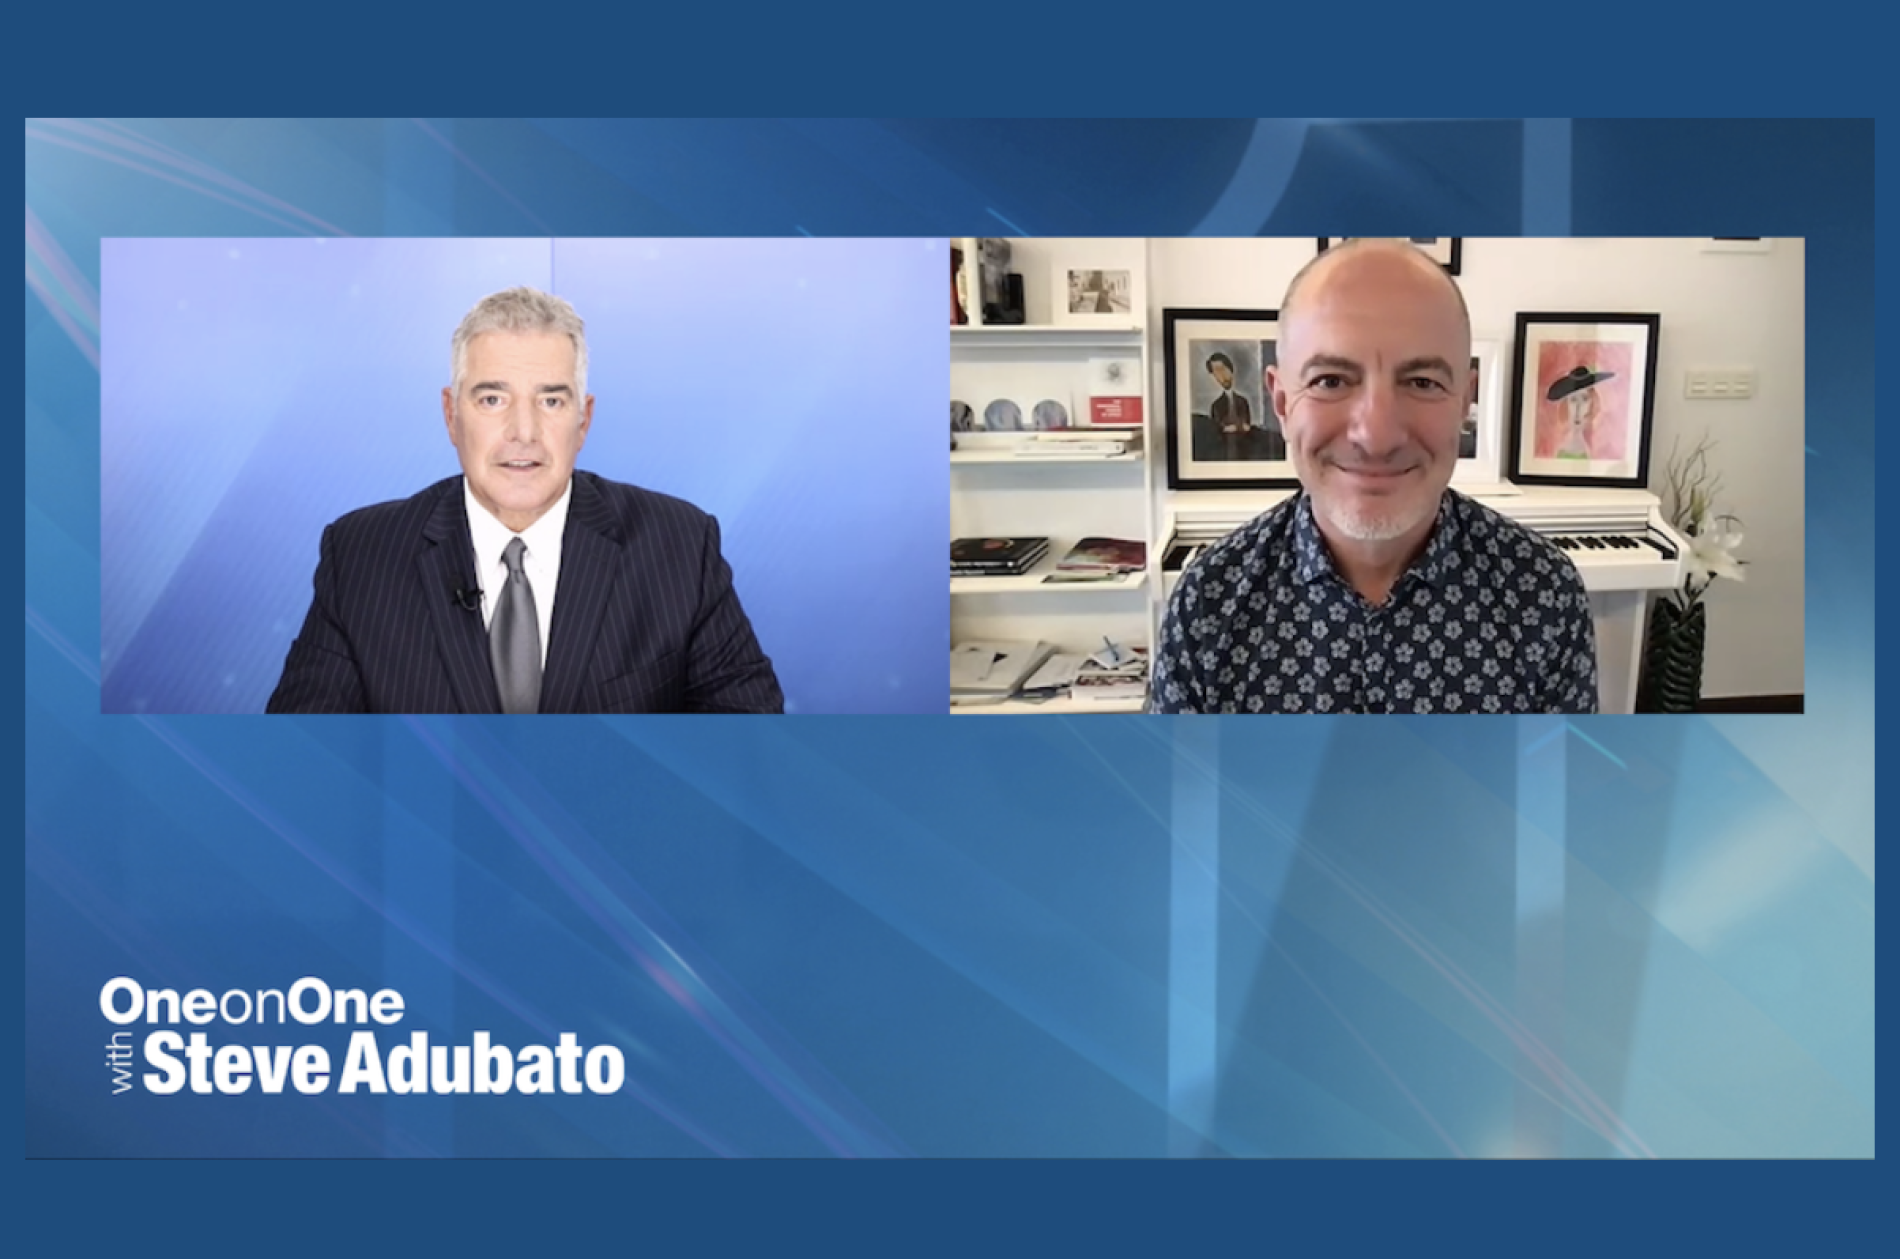 TV personality and guest, side by side digital windows with text: One-on-One with Steve Adubato